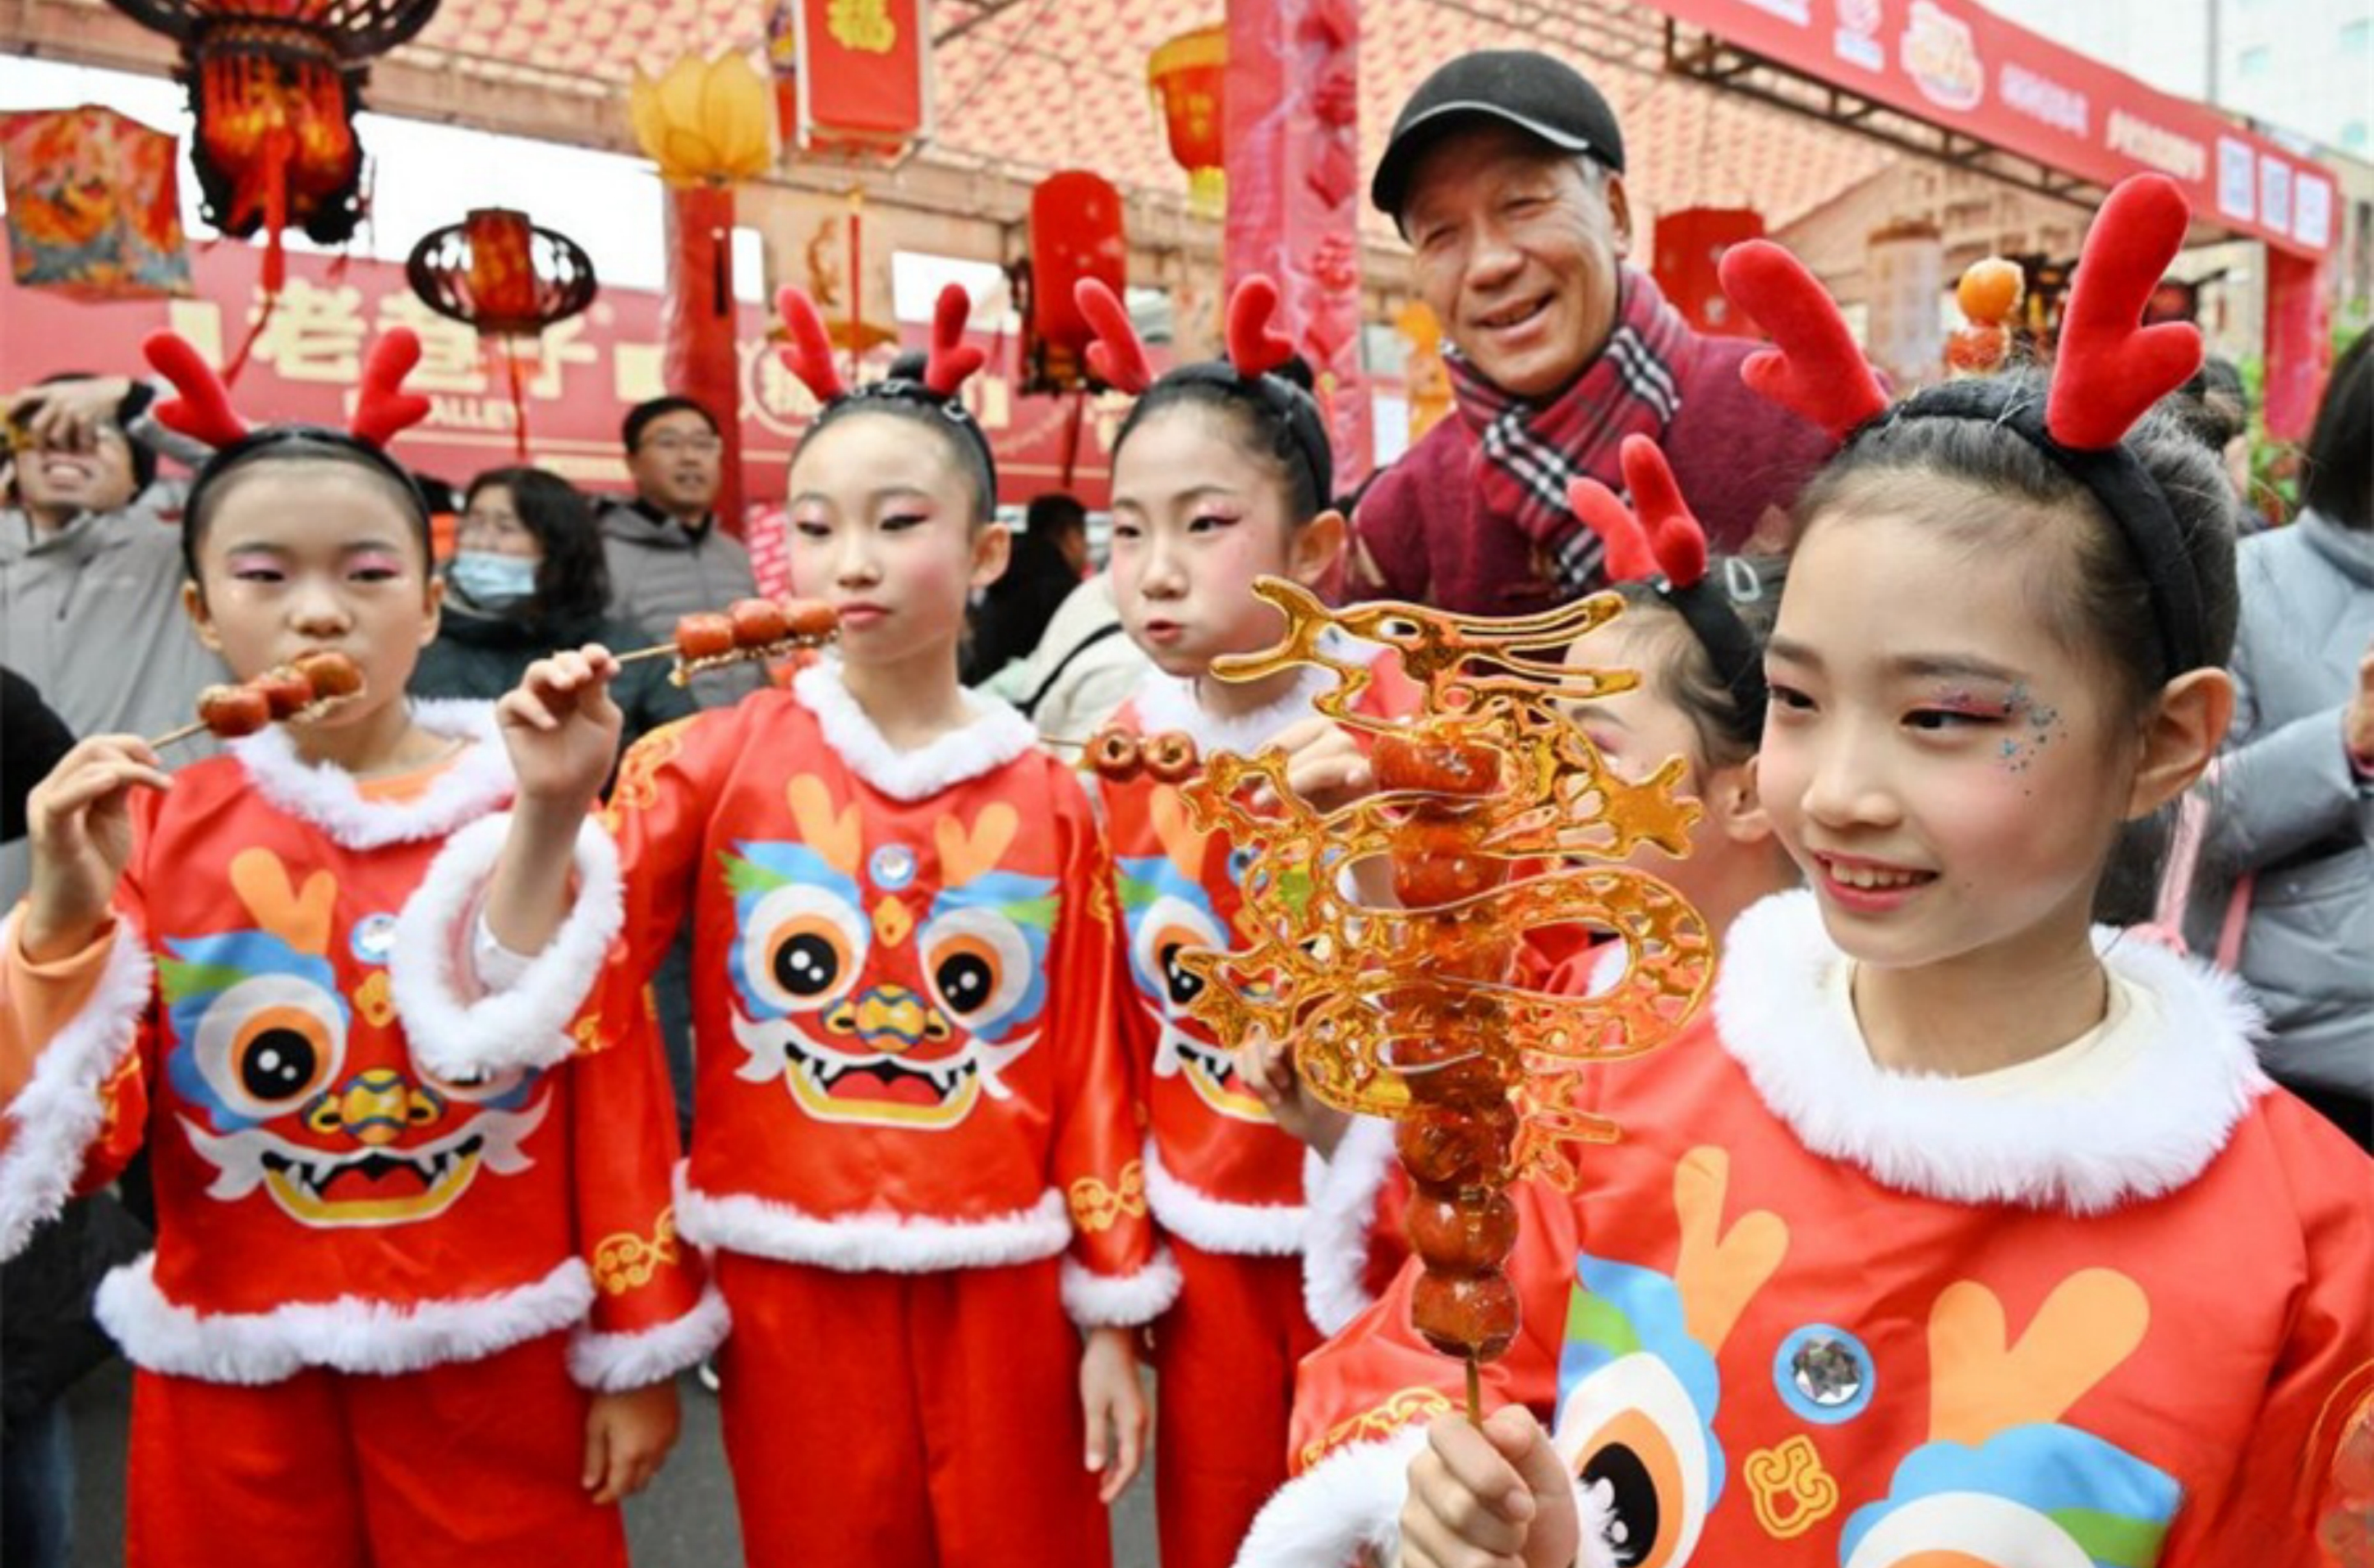 Fair attracts tourists during Lunar New Year celebrations in east China's Qingdao